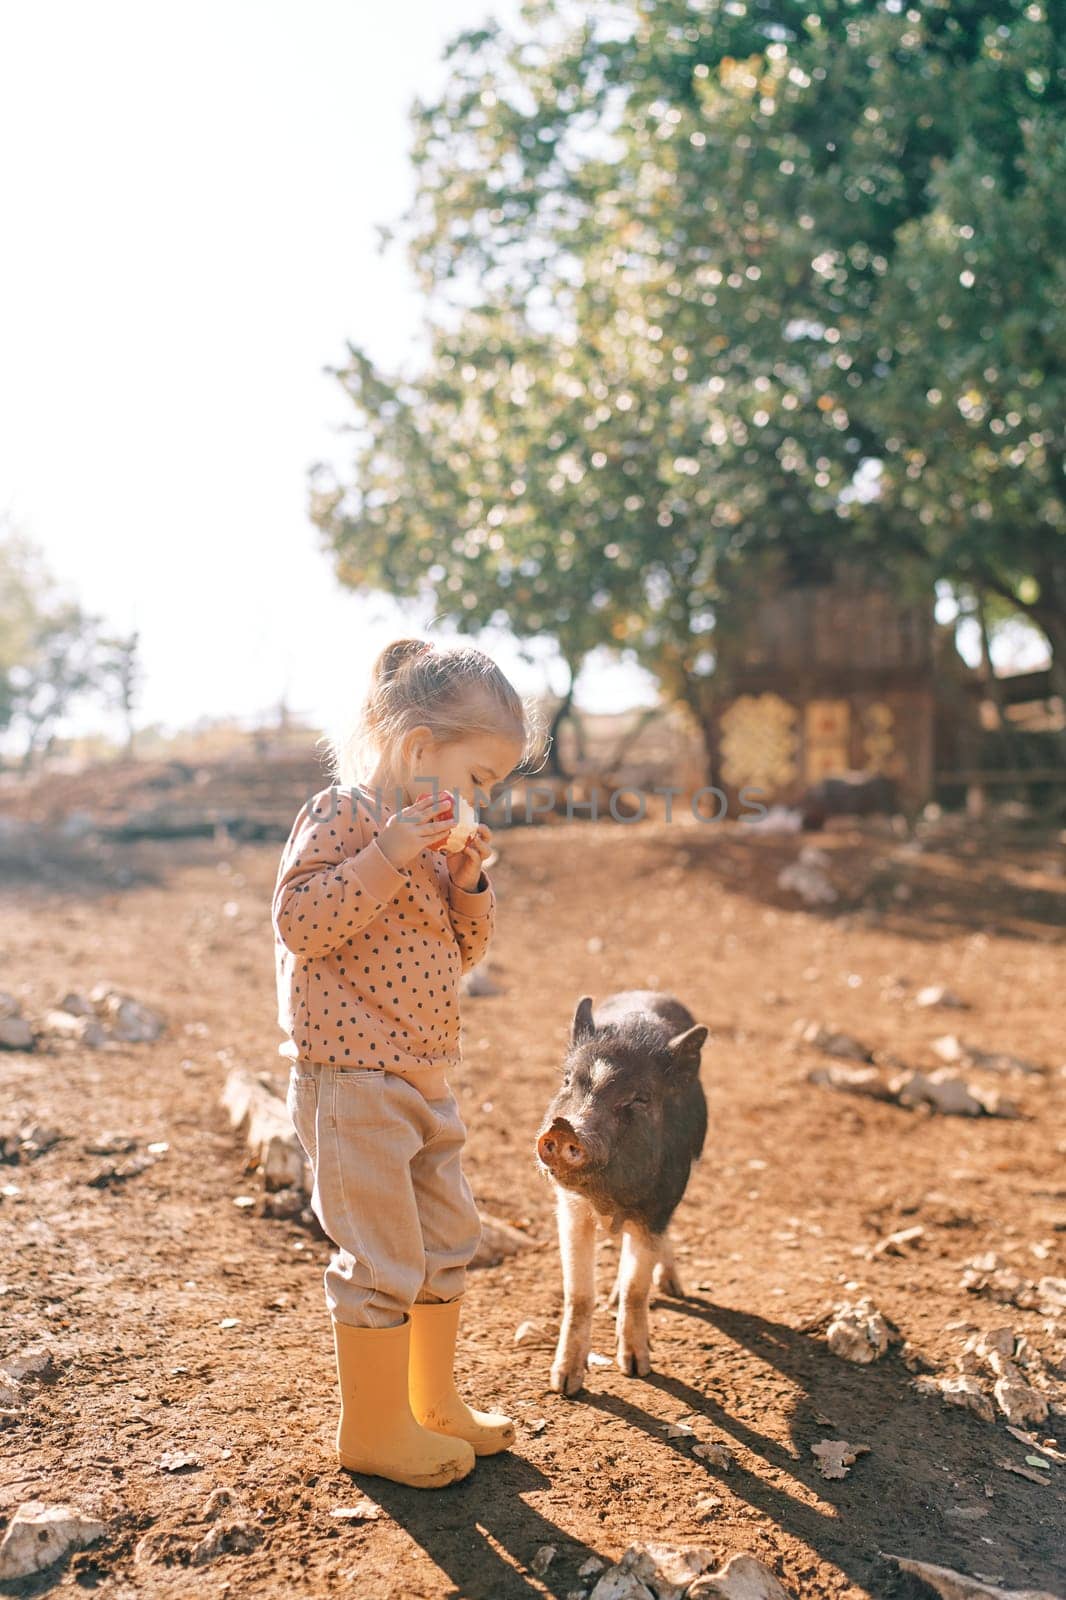 Fluffy little pig looks at a little girl gnawing an apple on a farm. High quality photo